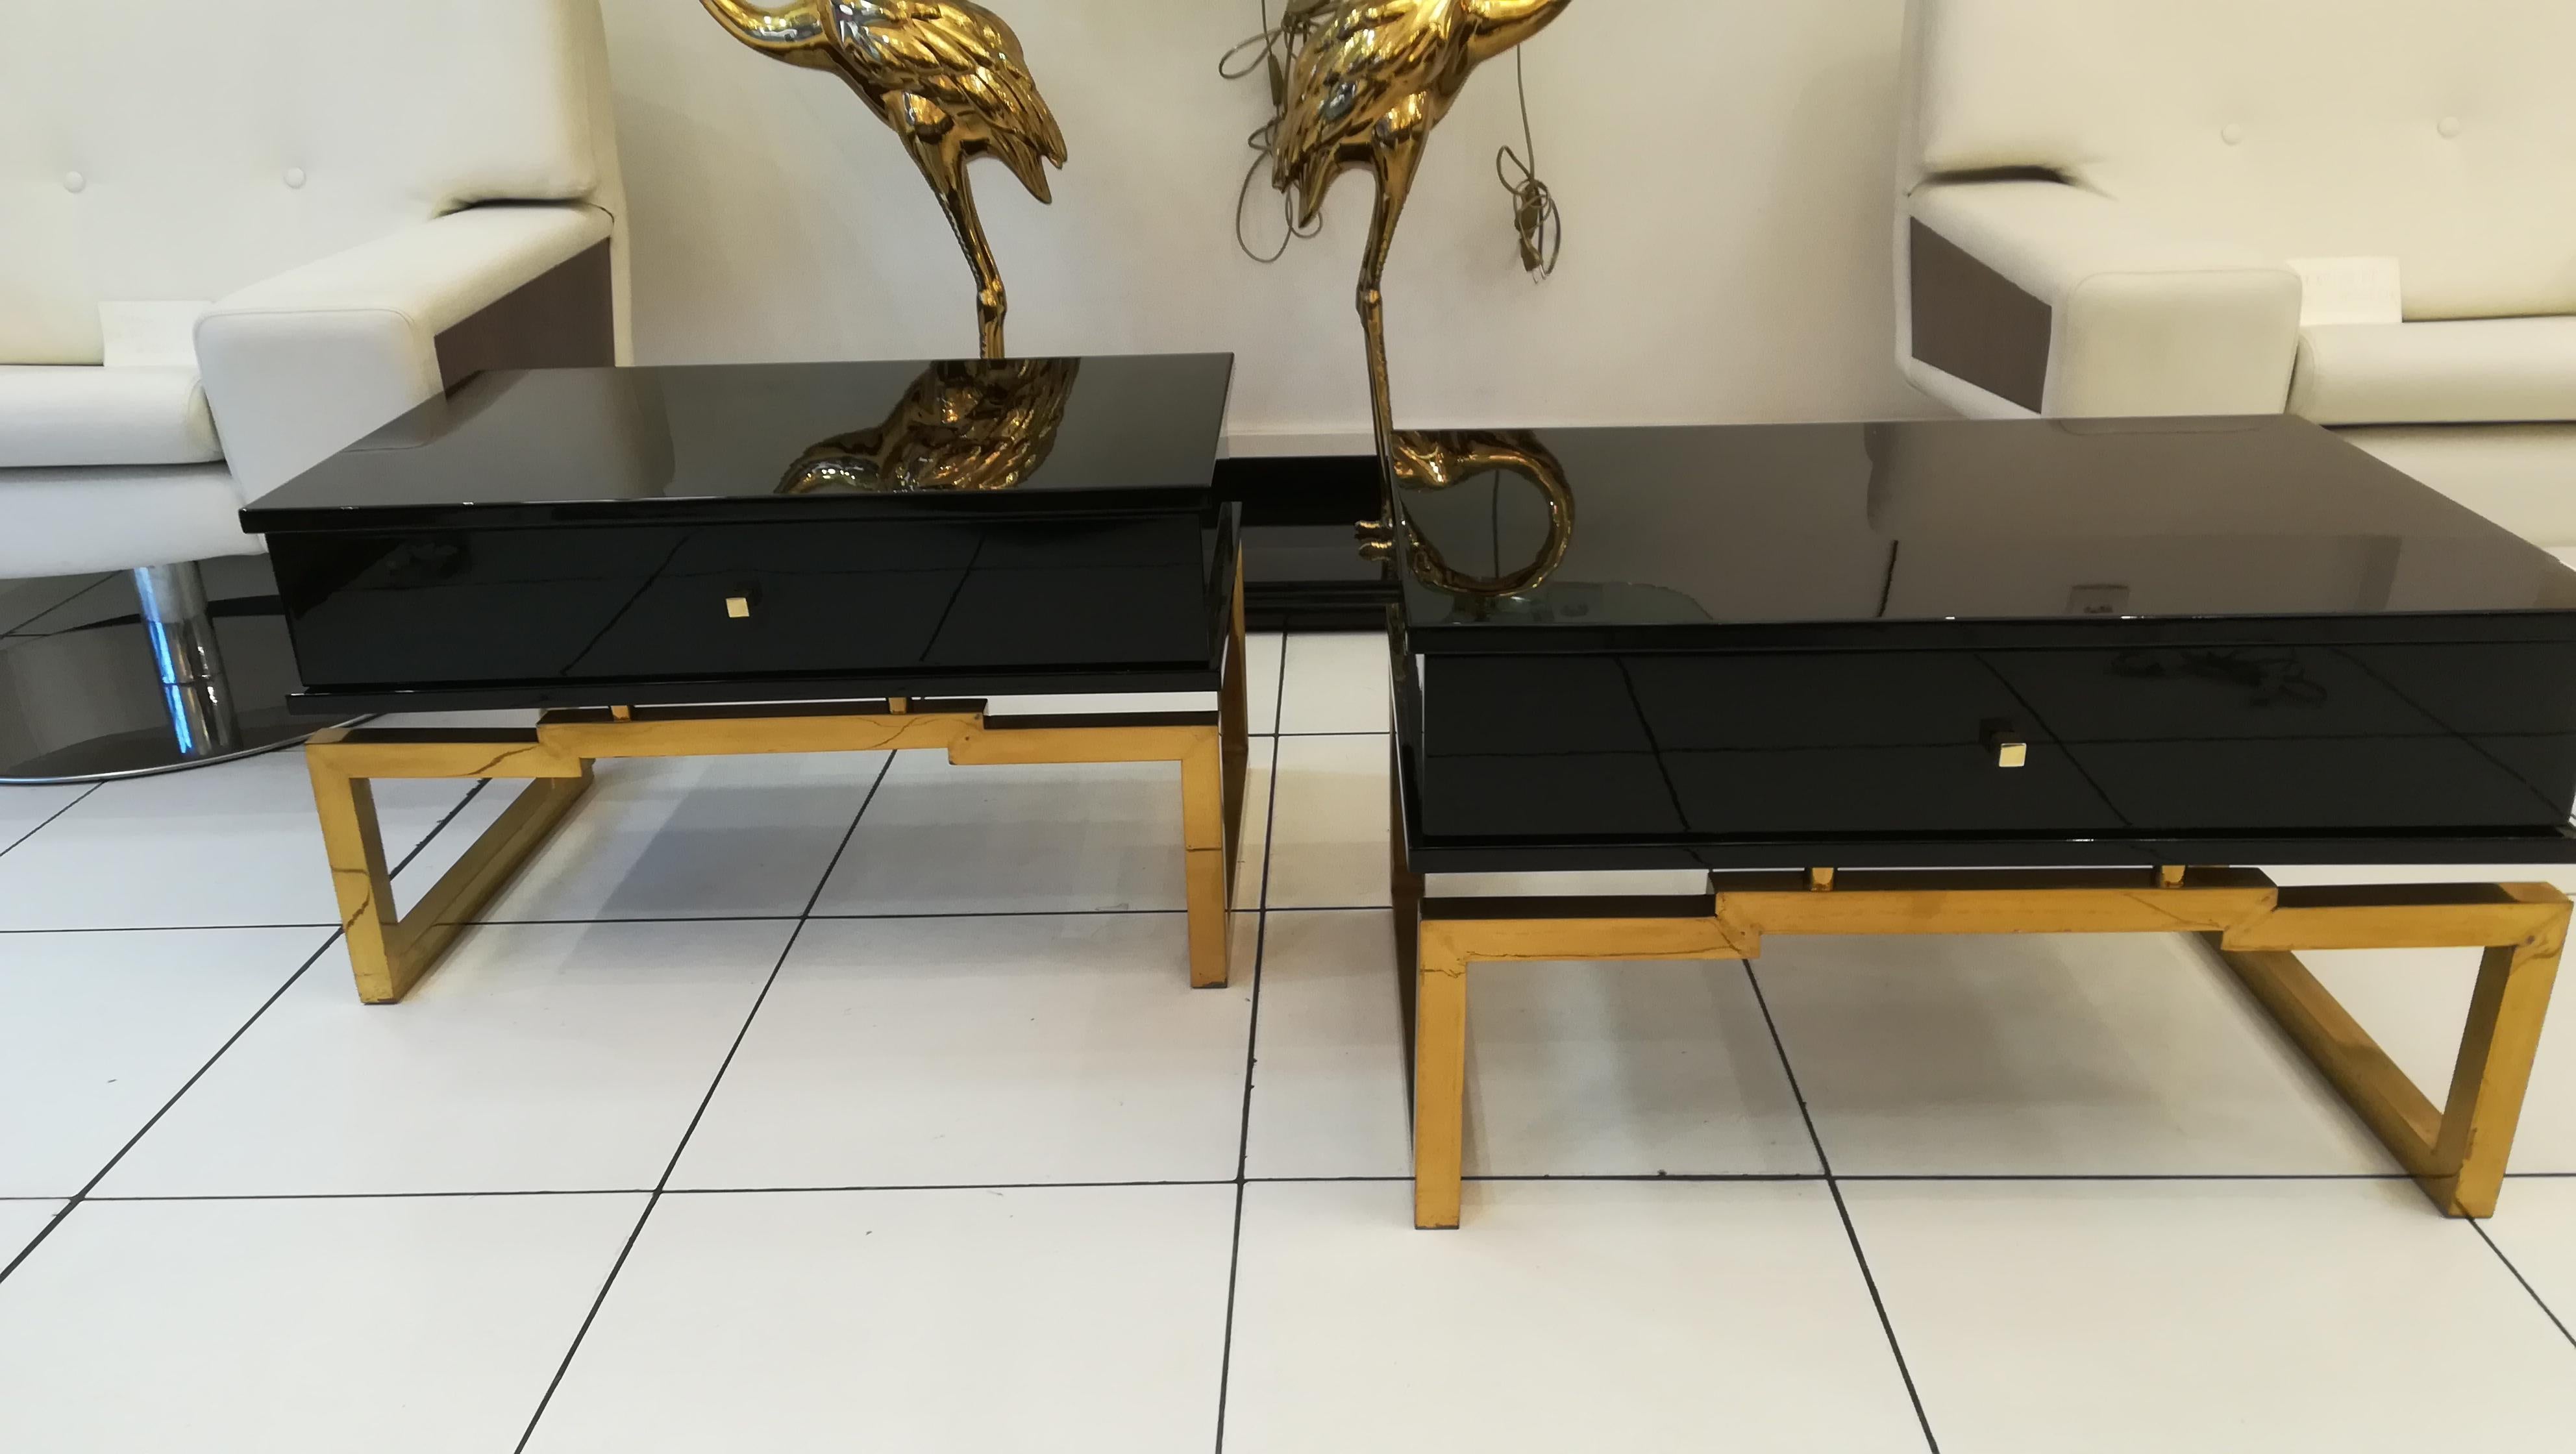 Brass Pair of Bedsides or End Tables in Lacquered Wood, circa 1970 By Mario Sabot